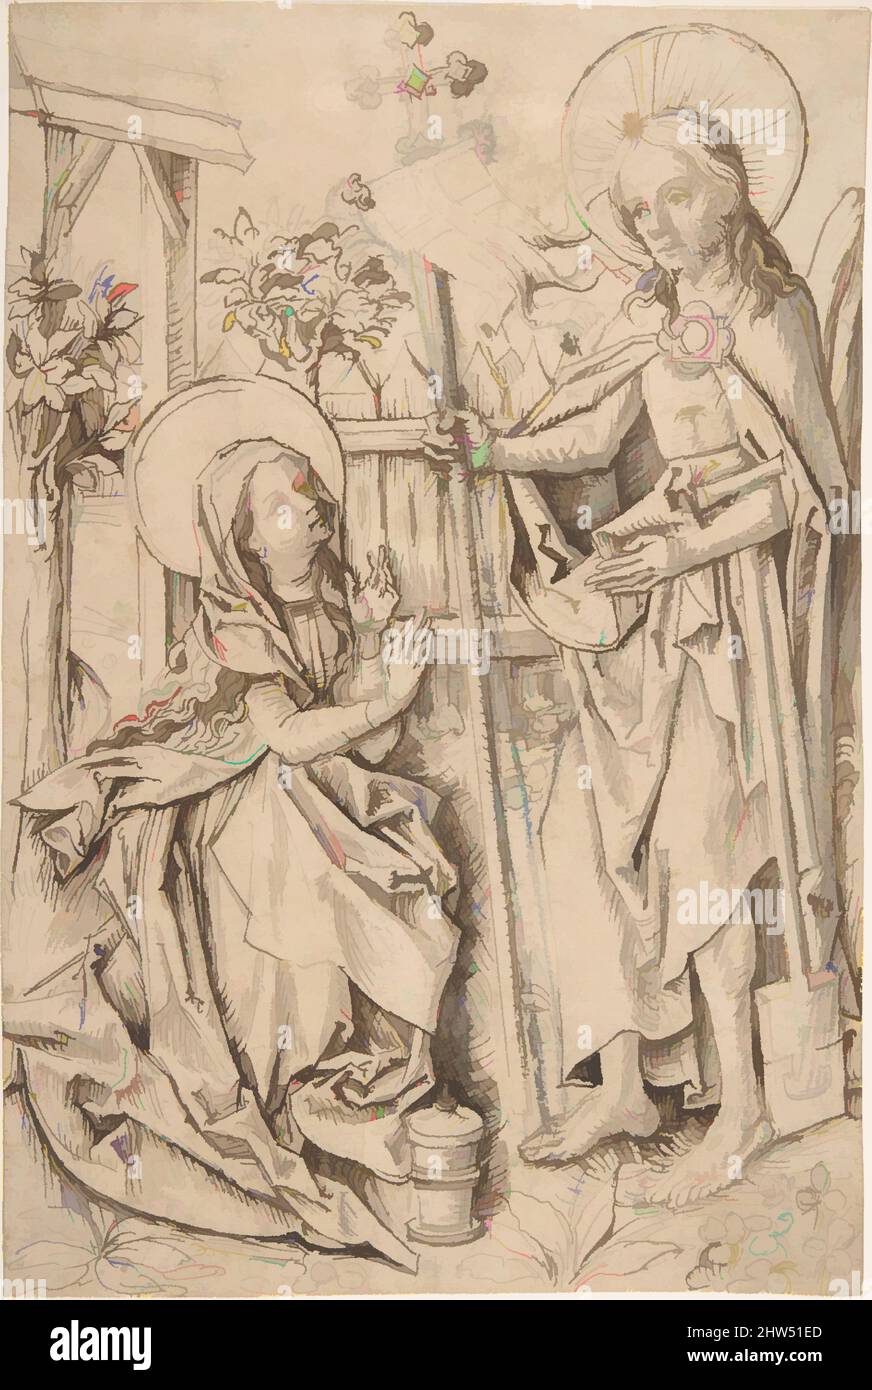 Art inspired by Christ Appearing to Mary Magdalen, ca. 1490, Pen and brown ink, brush and brown wash, and black chalk, 9 7/8 x 6 5/8 in. (25.1 x 16.8 cm), Drawings, Master of the Drapery Studies (German, Strasbourg, ca. 1470–1500), Although the artist nicknamed the 'Master of the, Classic works modernized by Artotop with a splash of modernity. Shapes, color and value, eye-catching visual impact on art. Emotions through freedom of artworks in a contemporary way. A timeless message pursuing a wildly creative new direction. Artists turning to the digital medium and creating the Artotop NFT Stock Photo